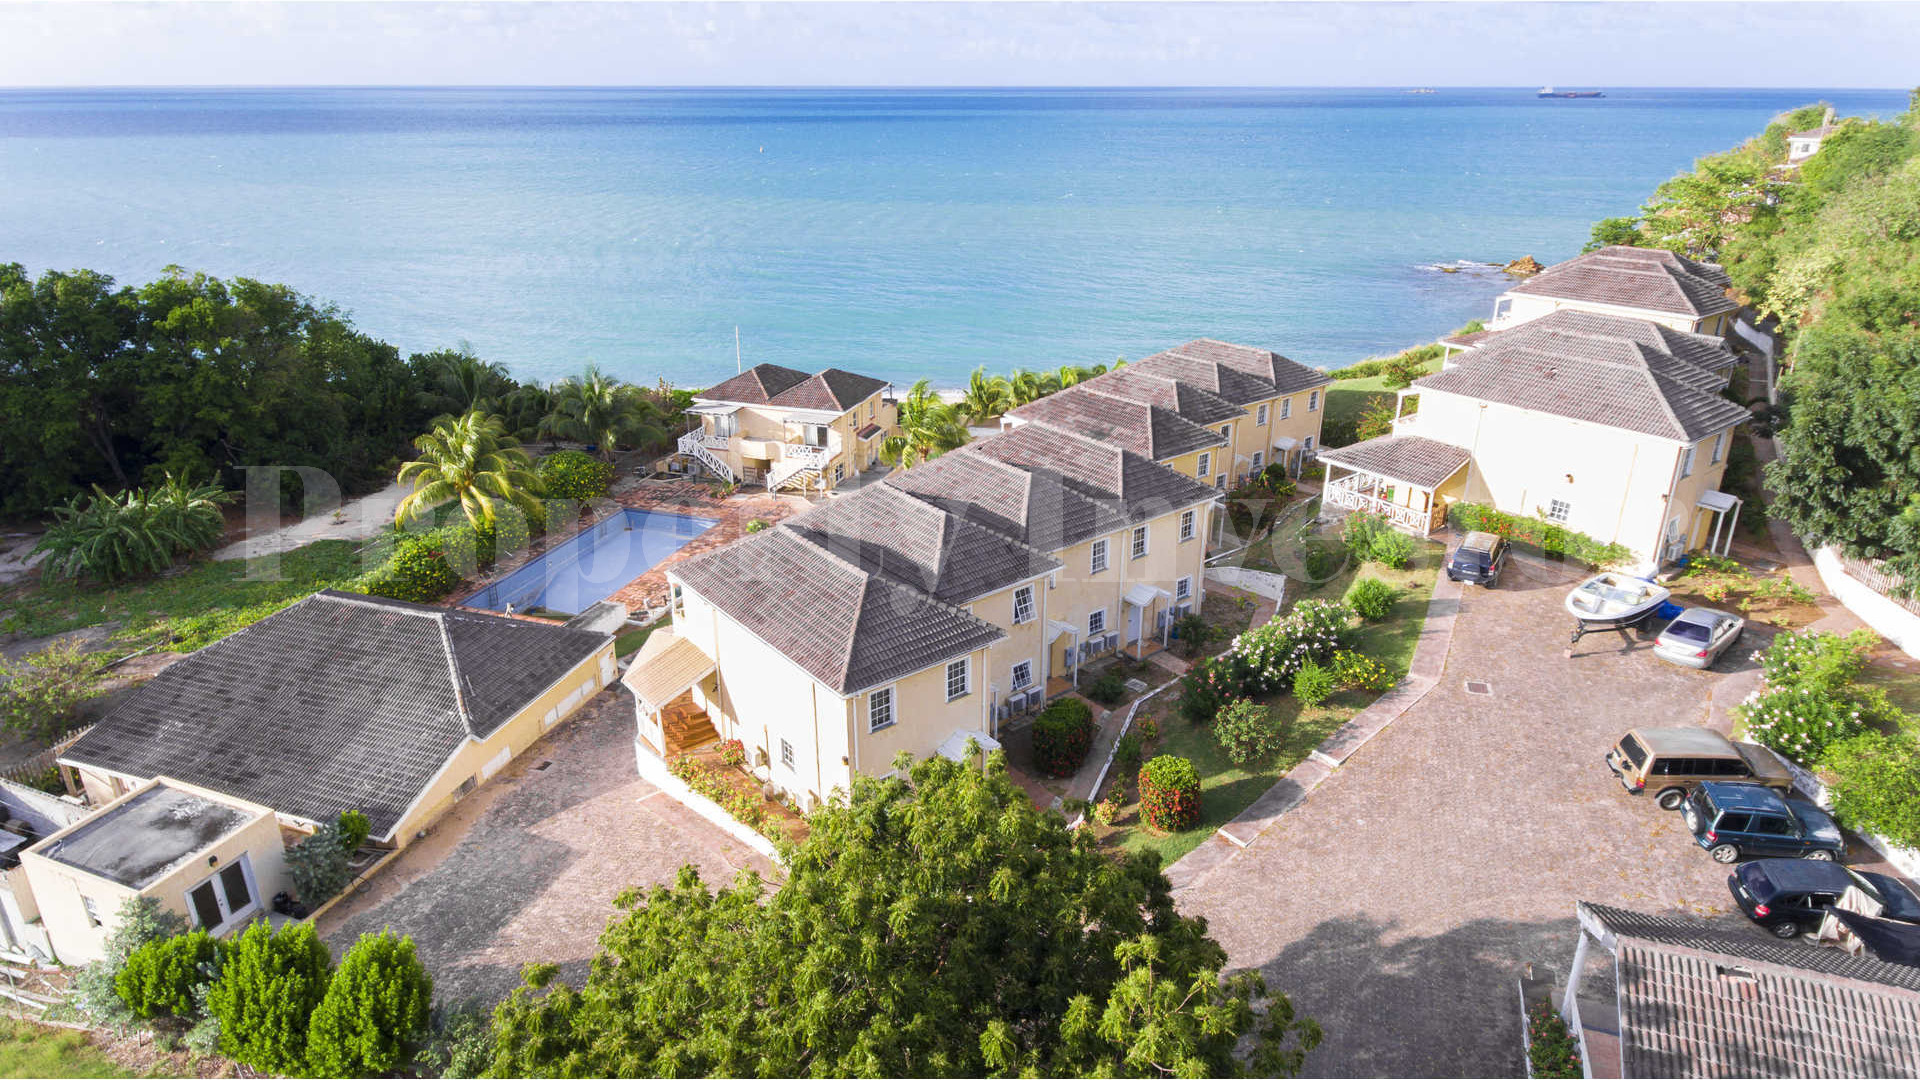 Spectacular 59 Bedroom Private Beach Resort for Sale at St. John's Harbour, Antigua